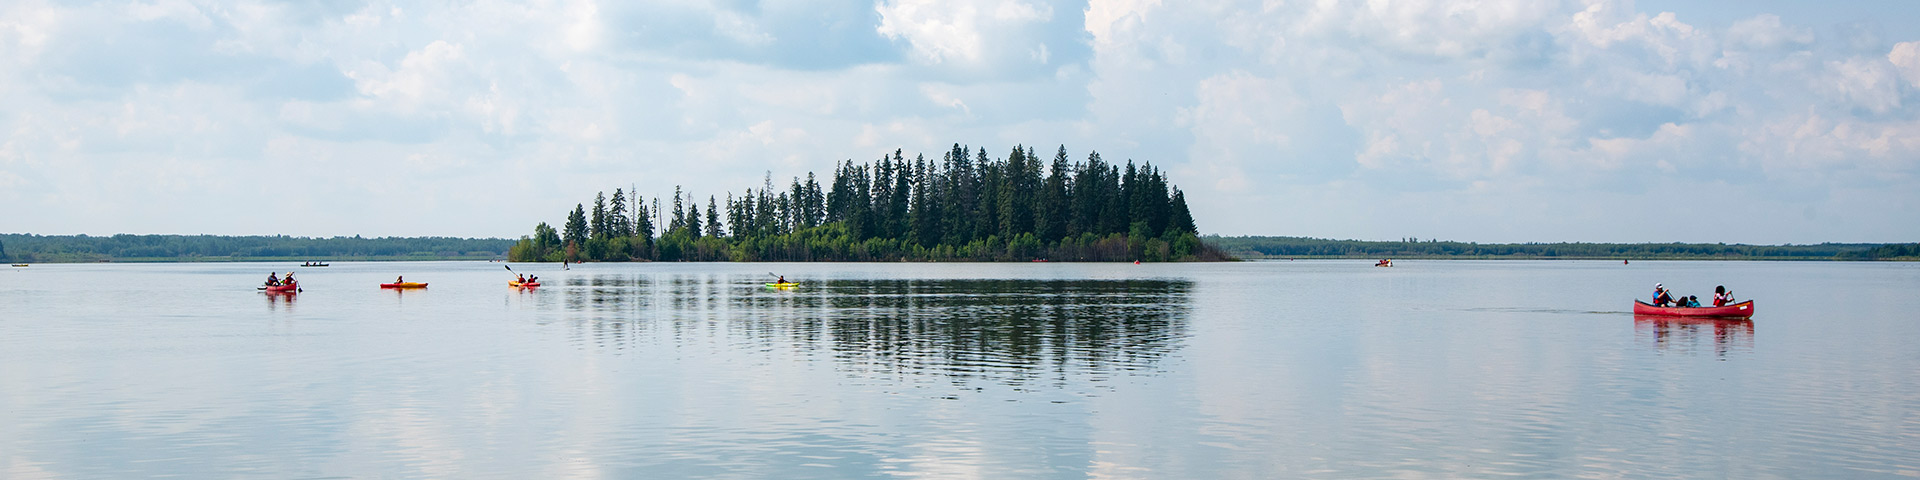 A photo taken from a distance of paddlers enjoying a calm summer day on Astotin Lake. A skyline of trees is visible in the background. 